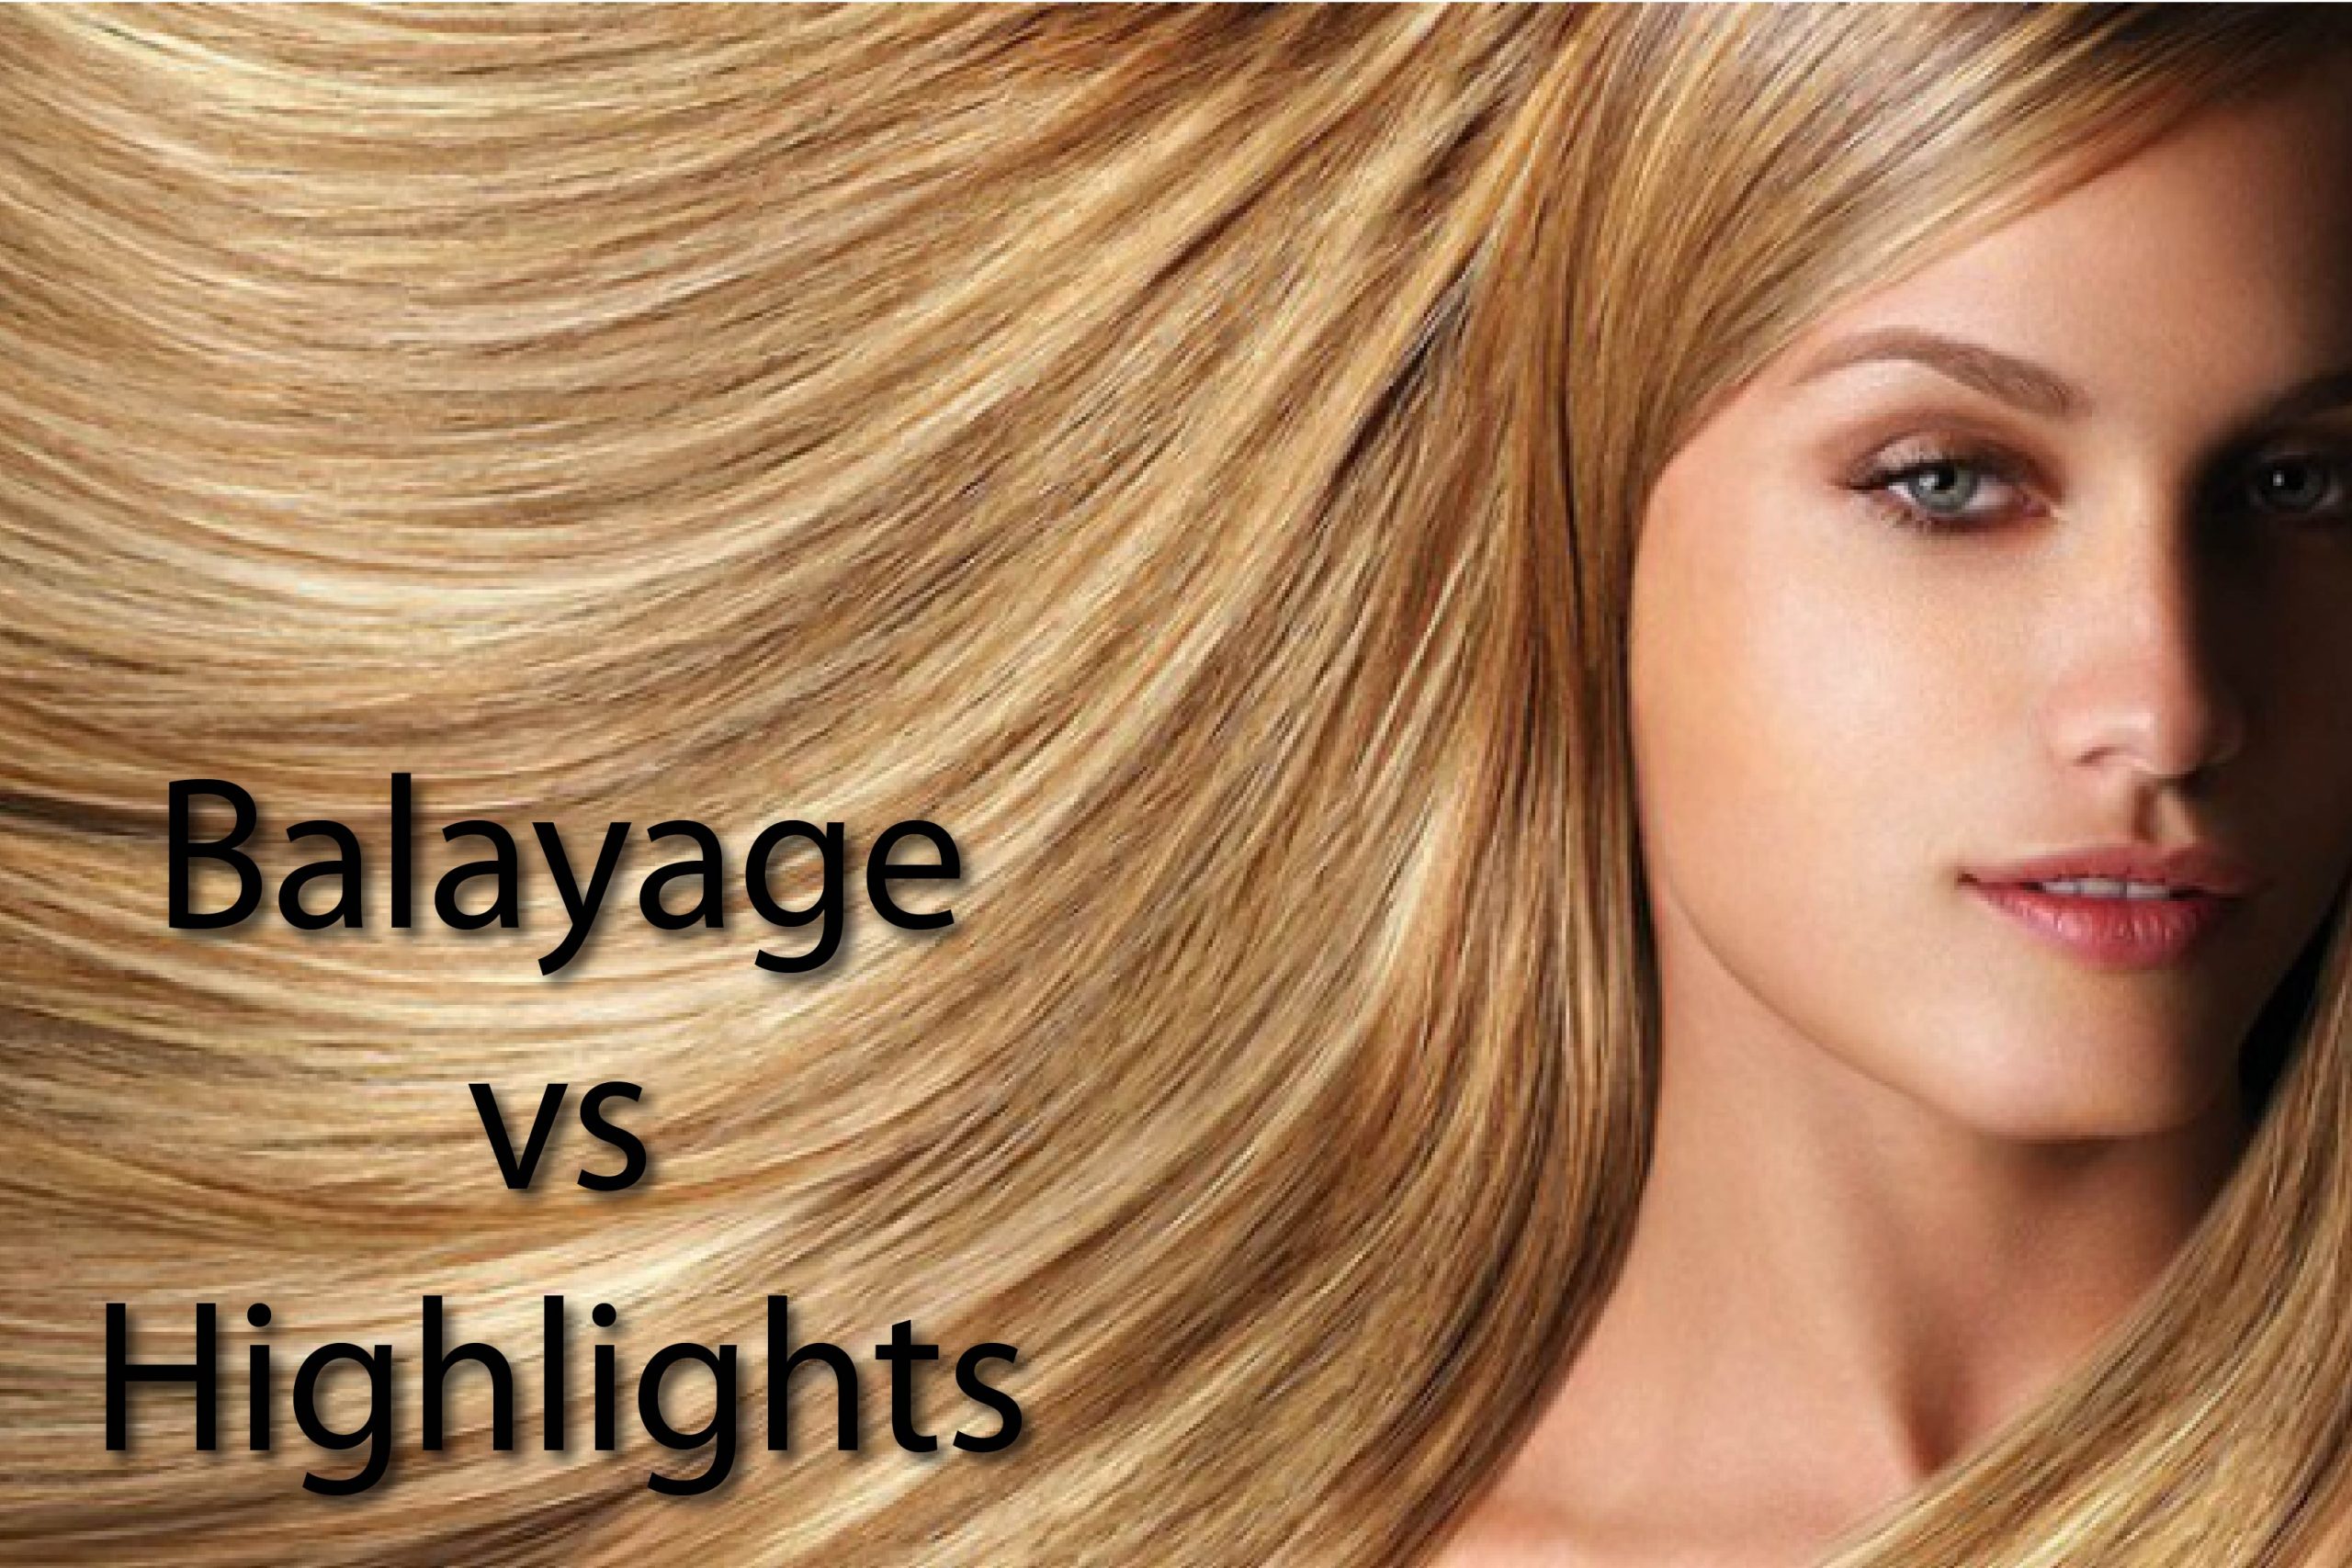 4. "The Difference Between Balayage and Baby Blonde Highlights" - wide 10